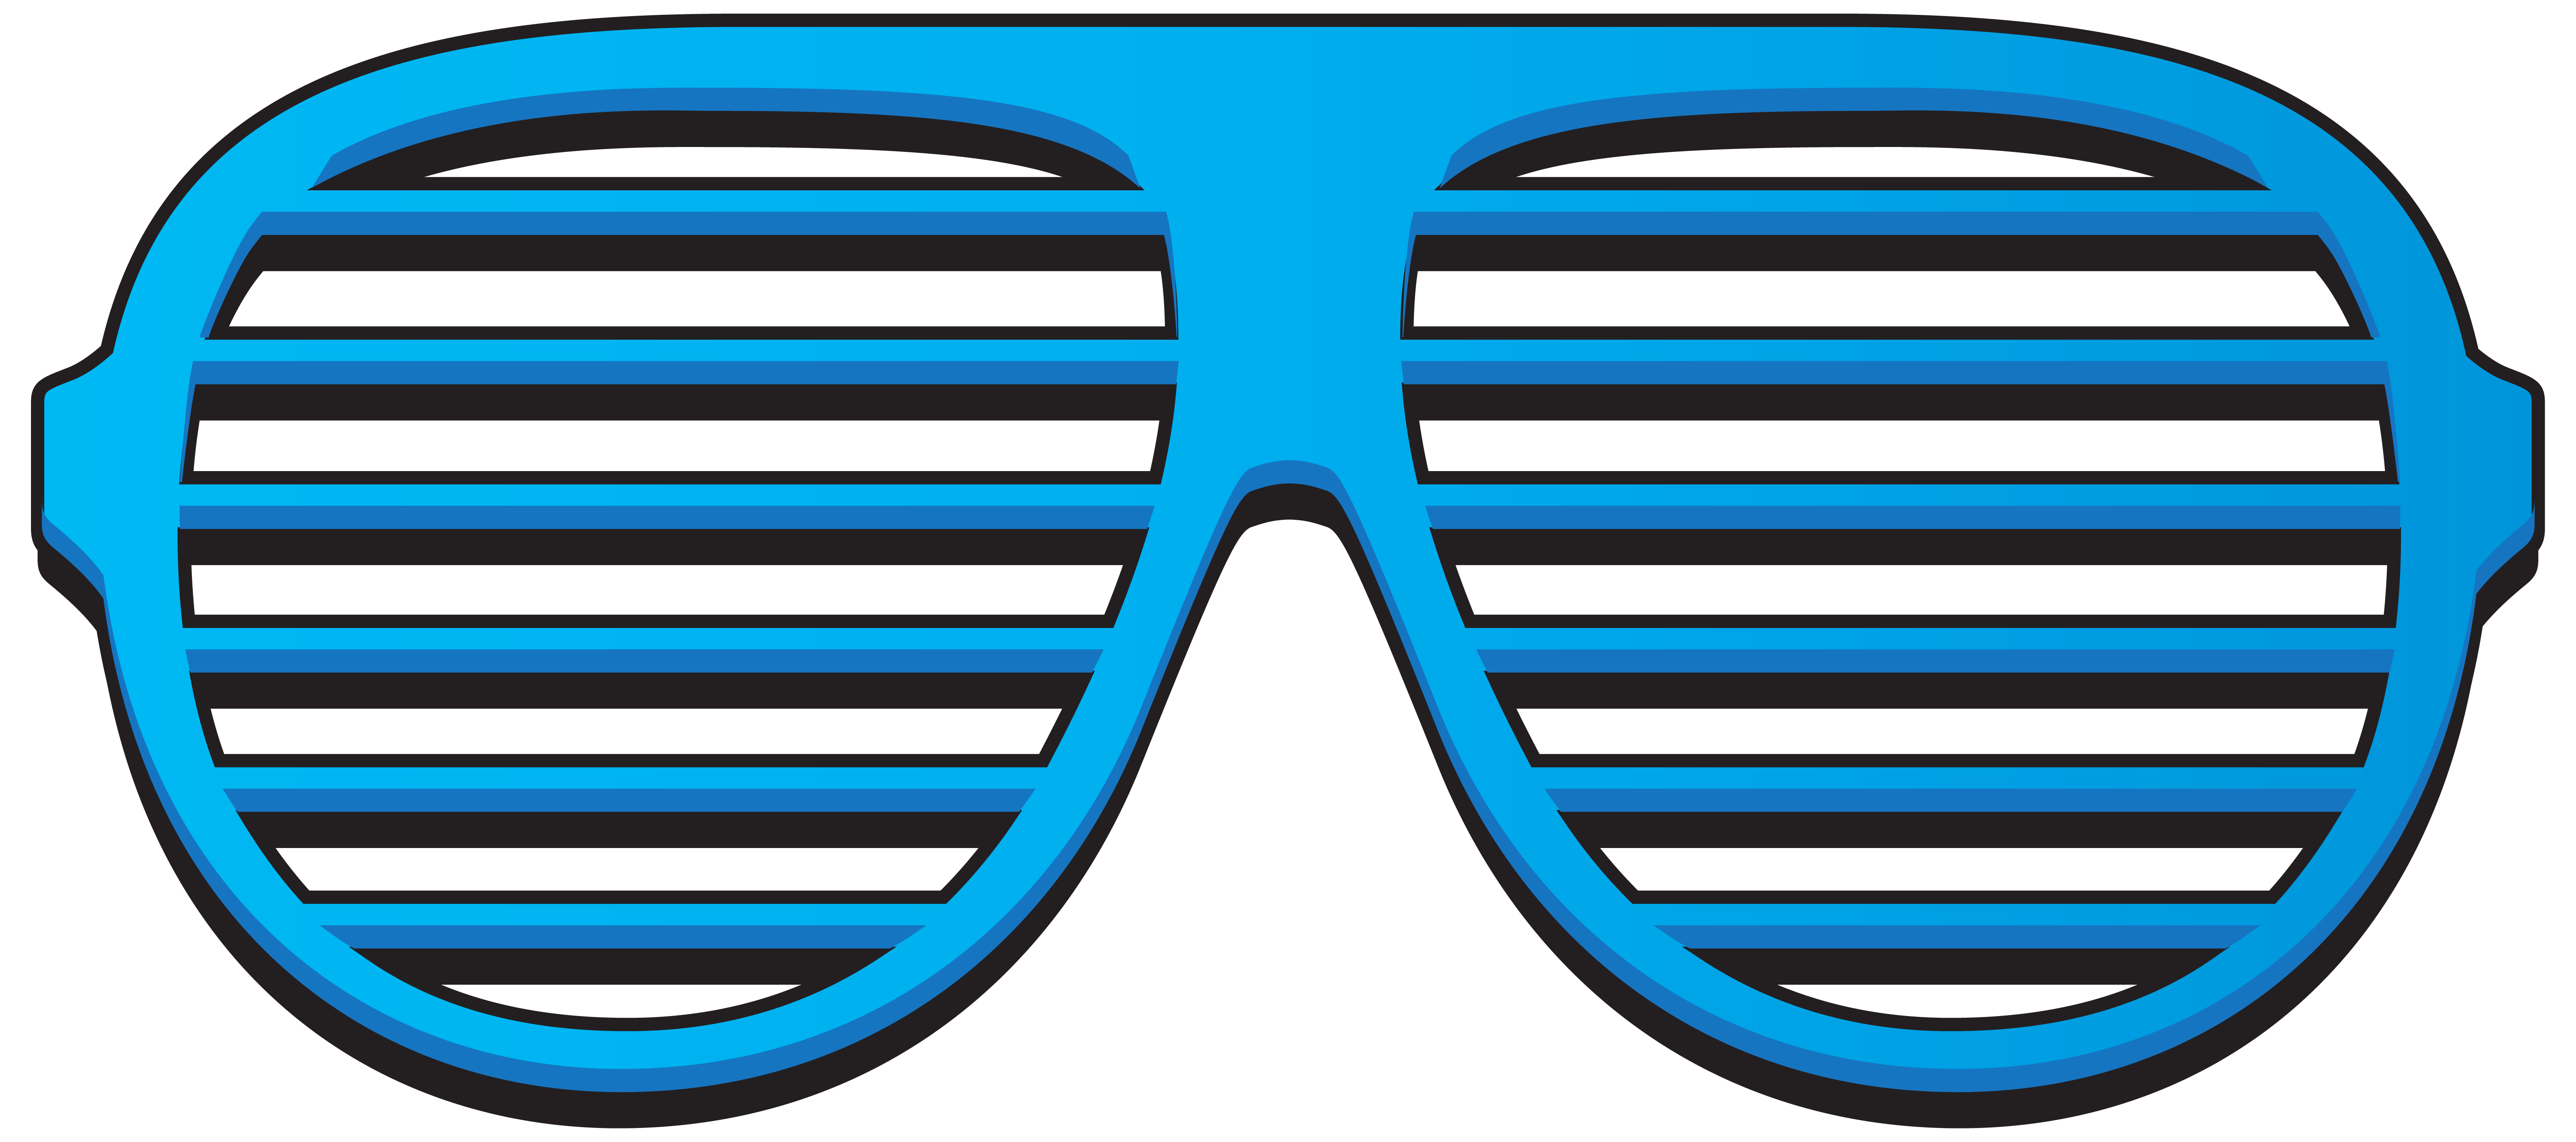 Blue Shutter Shades PNG Clipart Image